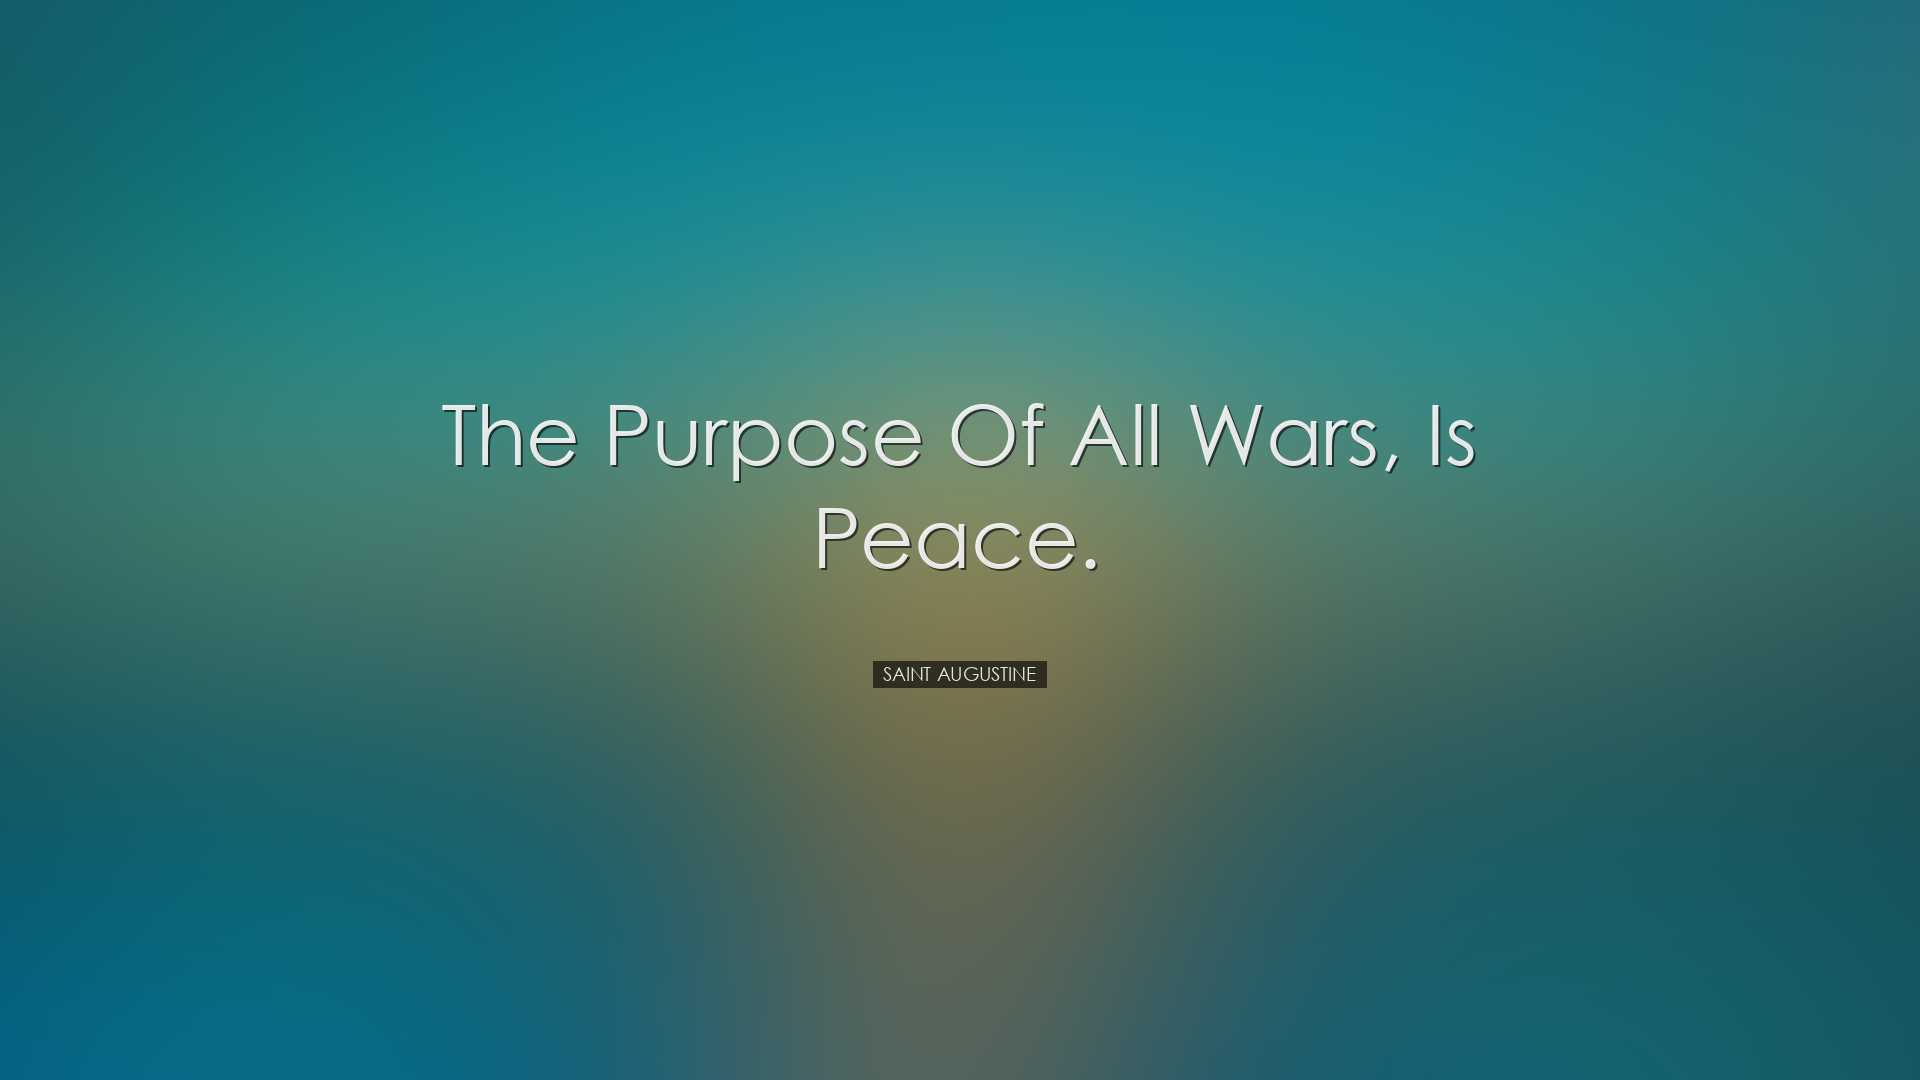 The purpose of all wars, is peace. - Saint Augustine